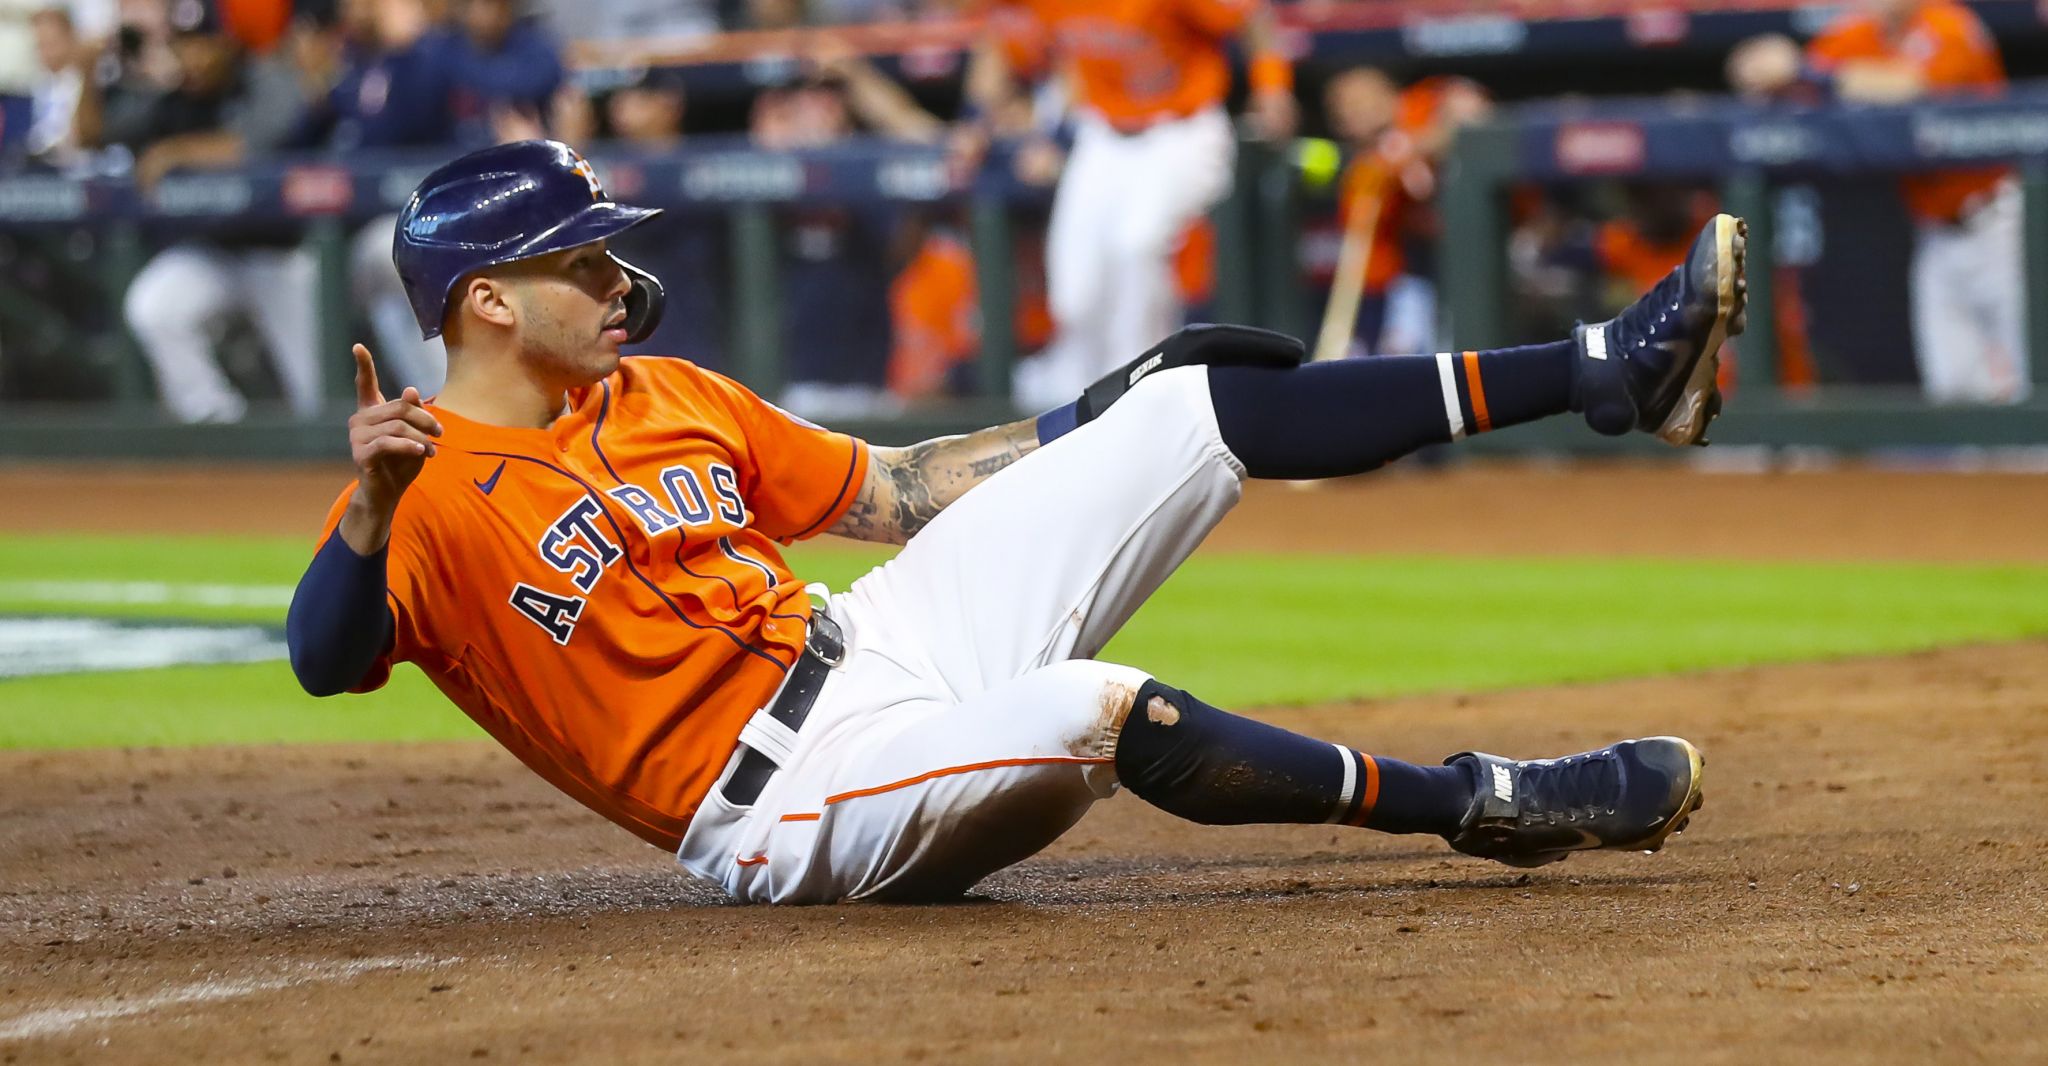 Dusty Baker Urges the Astros to Re-sign Carlos Correa, a 3-Year